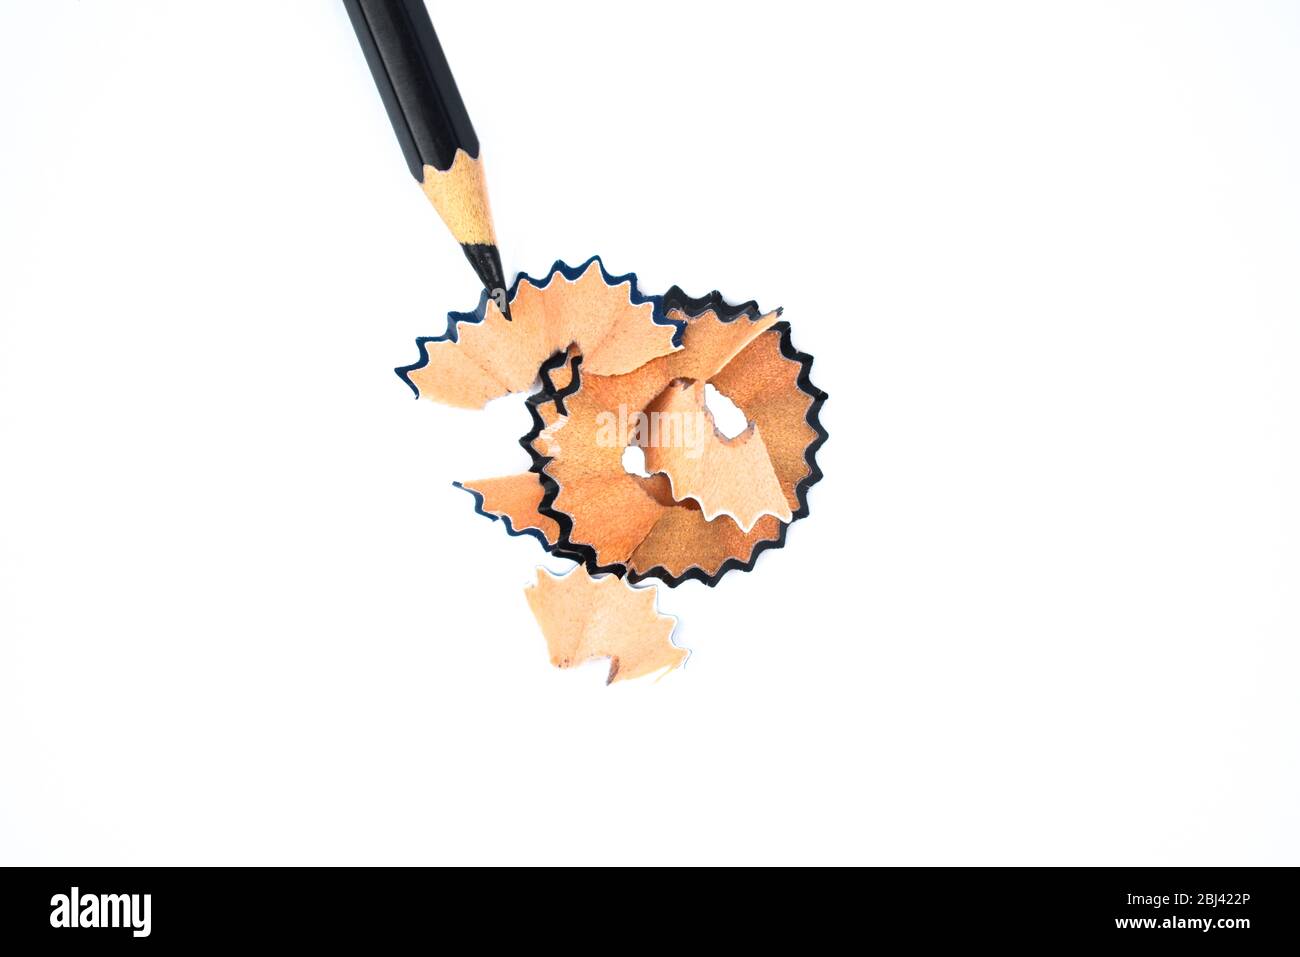 A black color wood pencil crayons pointing at some brown color pencil shavings Stock Photo